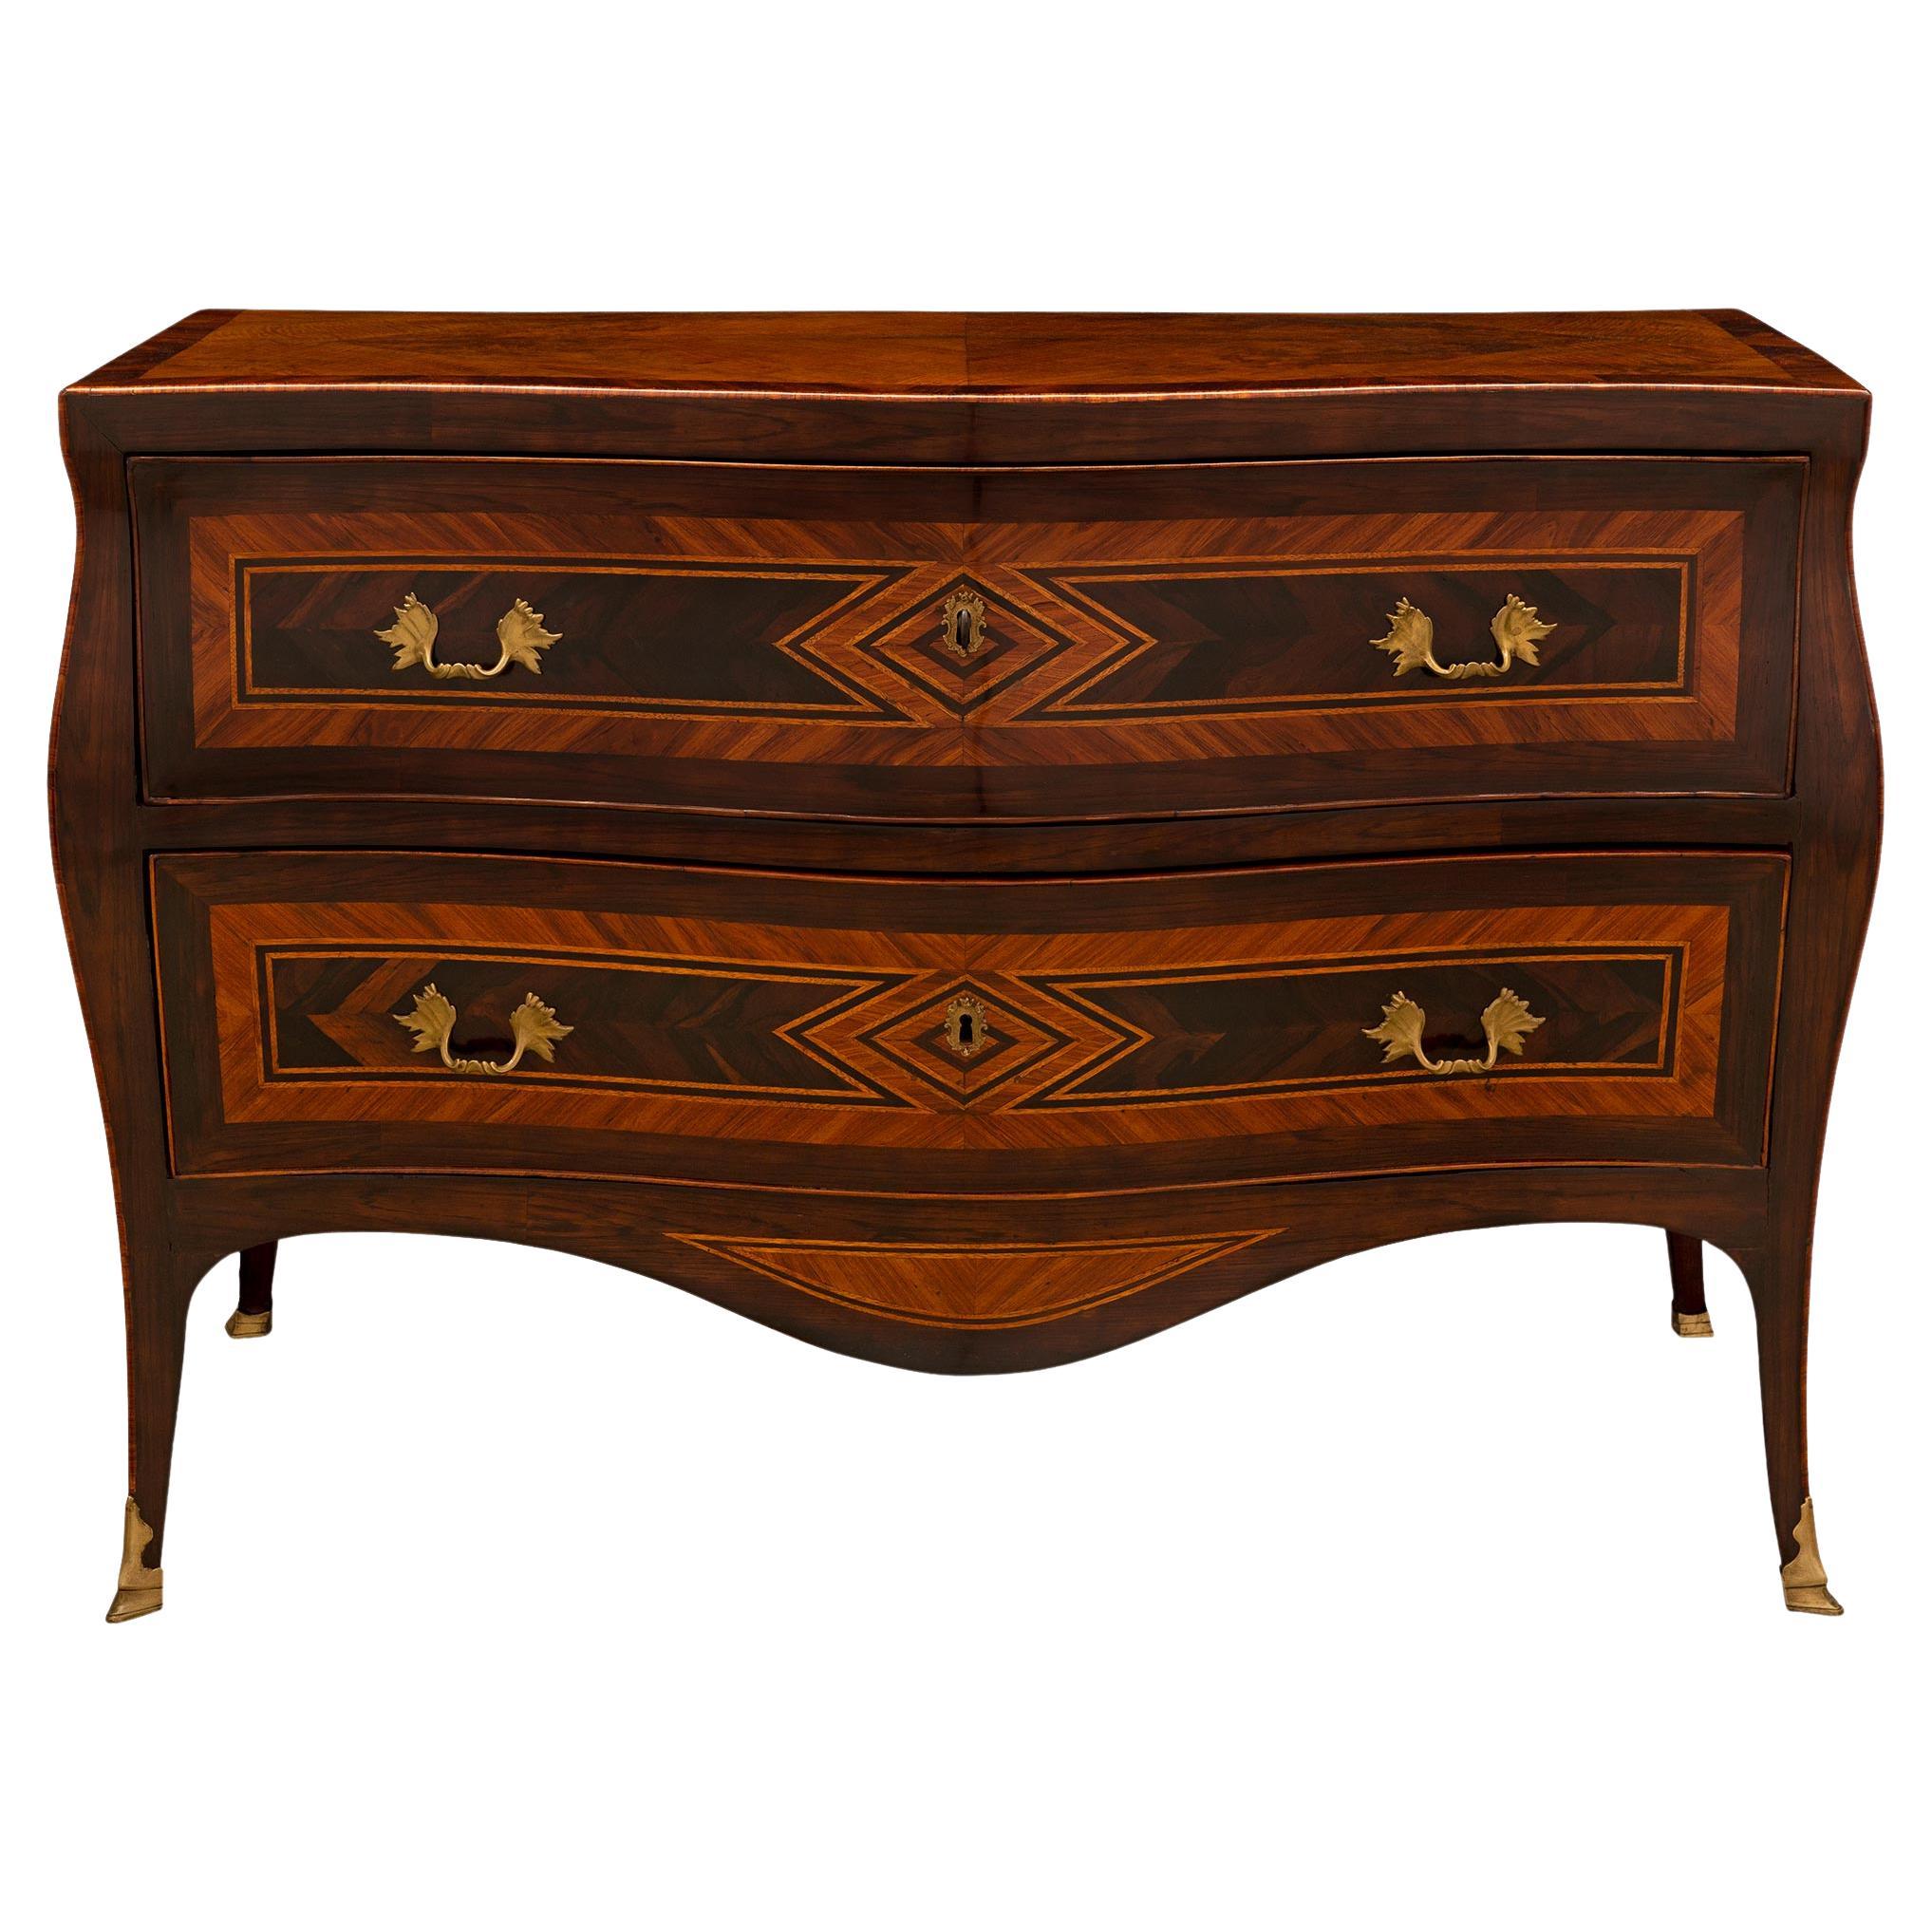 Italian 18th Century Louis XV Period Rosewood, Mahogany, And Satinwood Commode For Sale